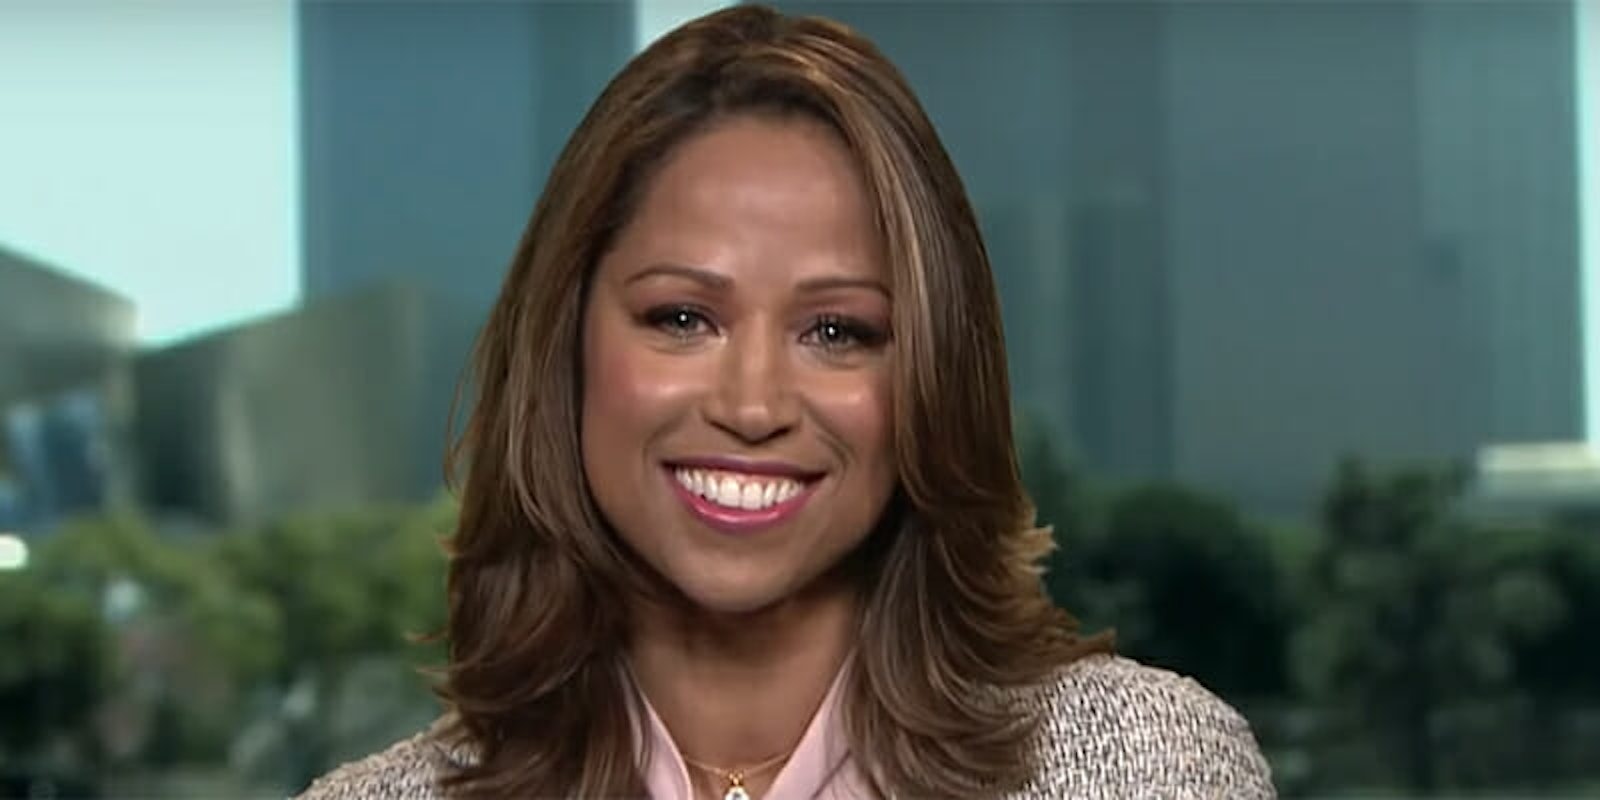 Stacey Dash said in an MSNBC interview that she's 'not here to judge' neo-Nazis.